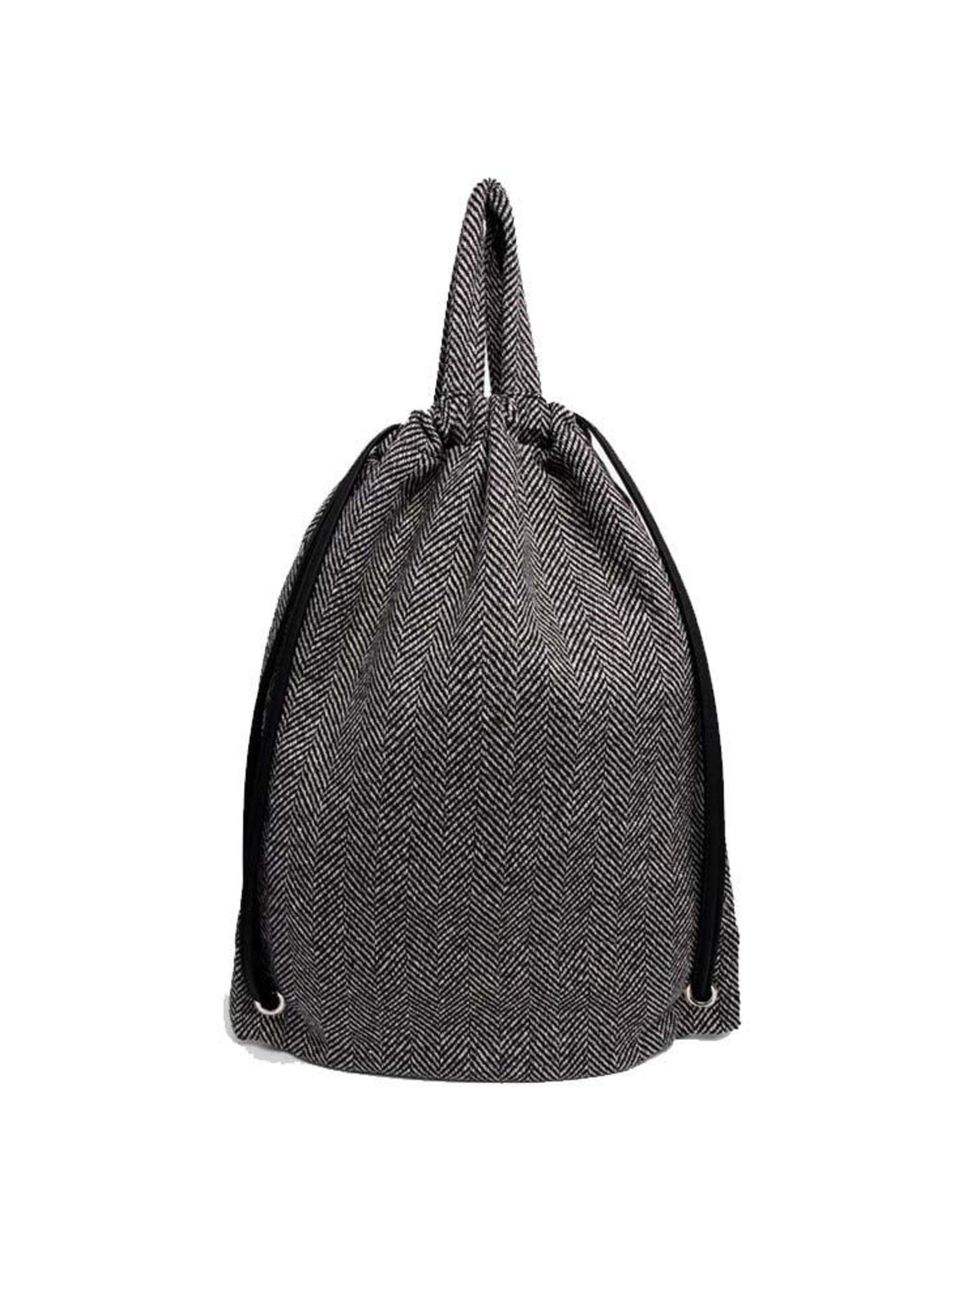 <p><a href="http://www.asos.com/asos/asos-tweed-drawstring-backpack/prod/pgeproduct.aspx?iid=4255261&clr=Grey&SearchQuery=tweed&pgesize=36&pge=1&totalstyles=53&gridsize=3&gridrow=2&gridcolumn=2" target="_blank">Asos bag</a>, £18</p>